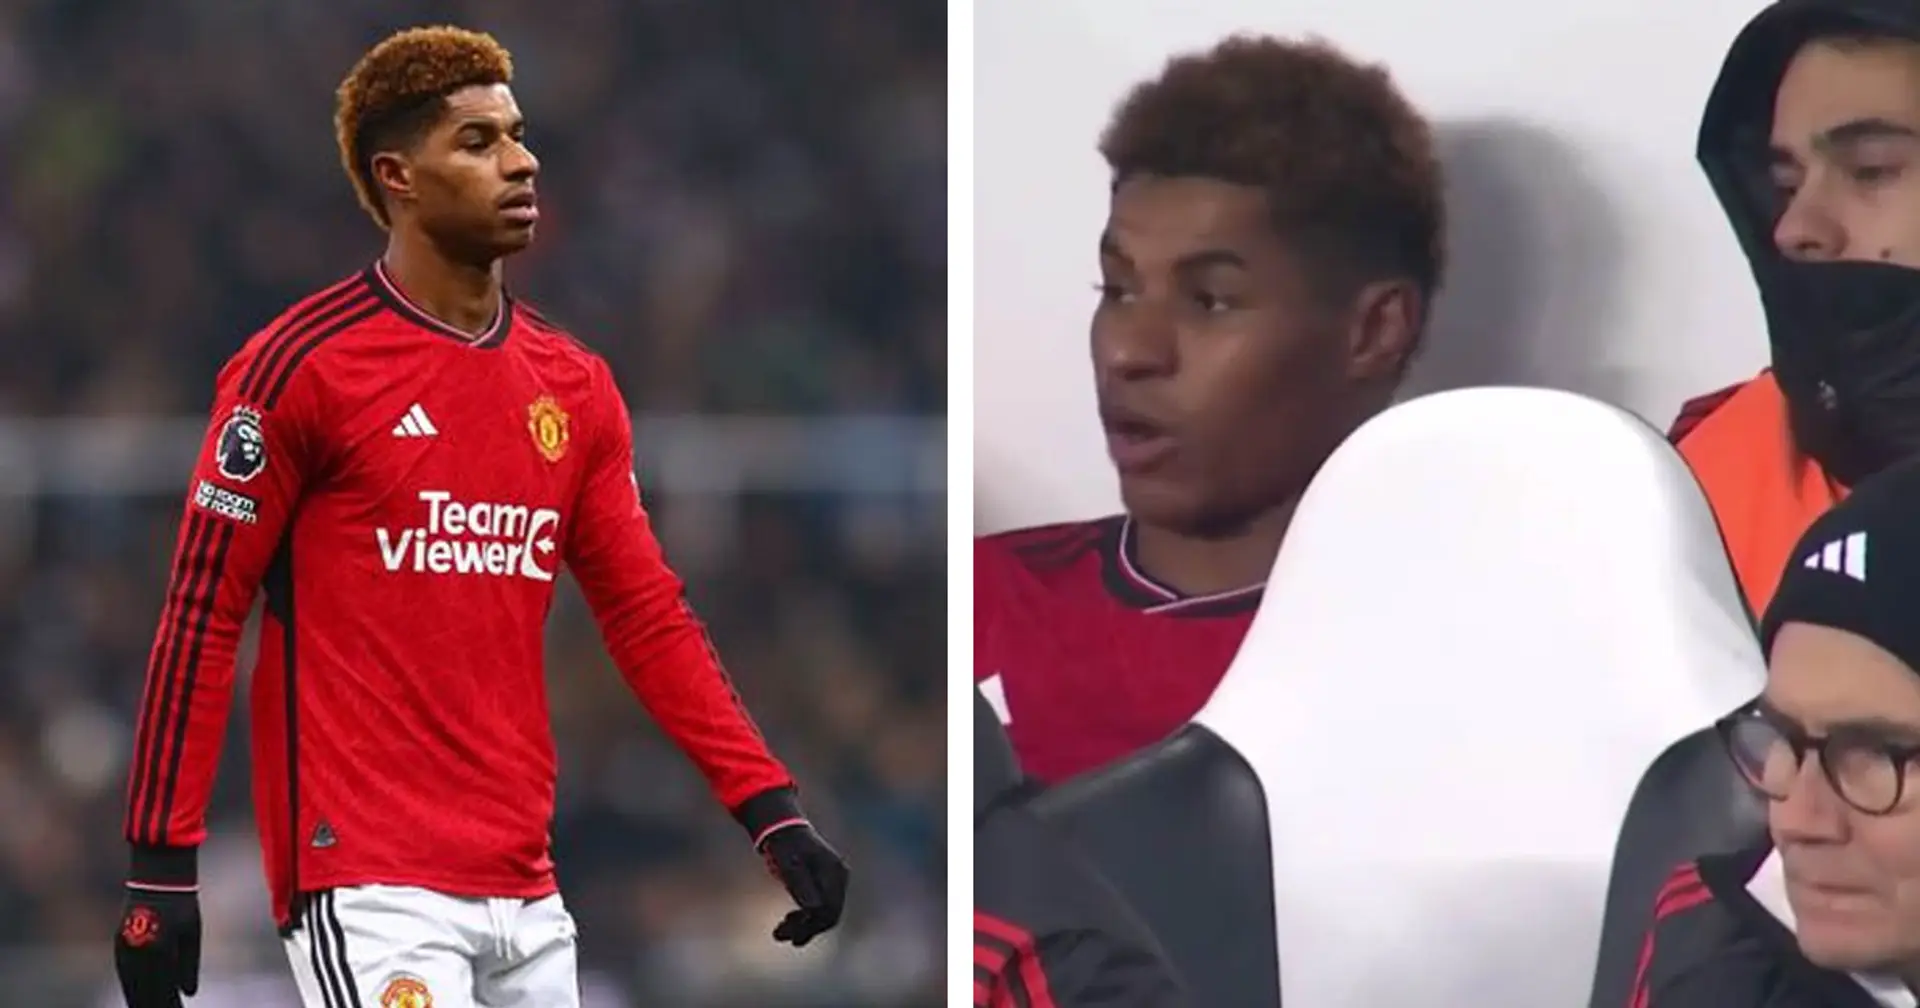 Spotted: Rashford's furious reaction to being substituted against Newcastle United